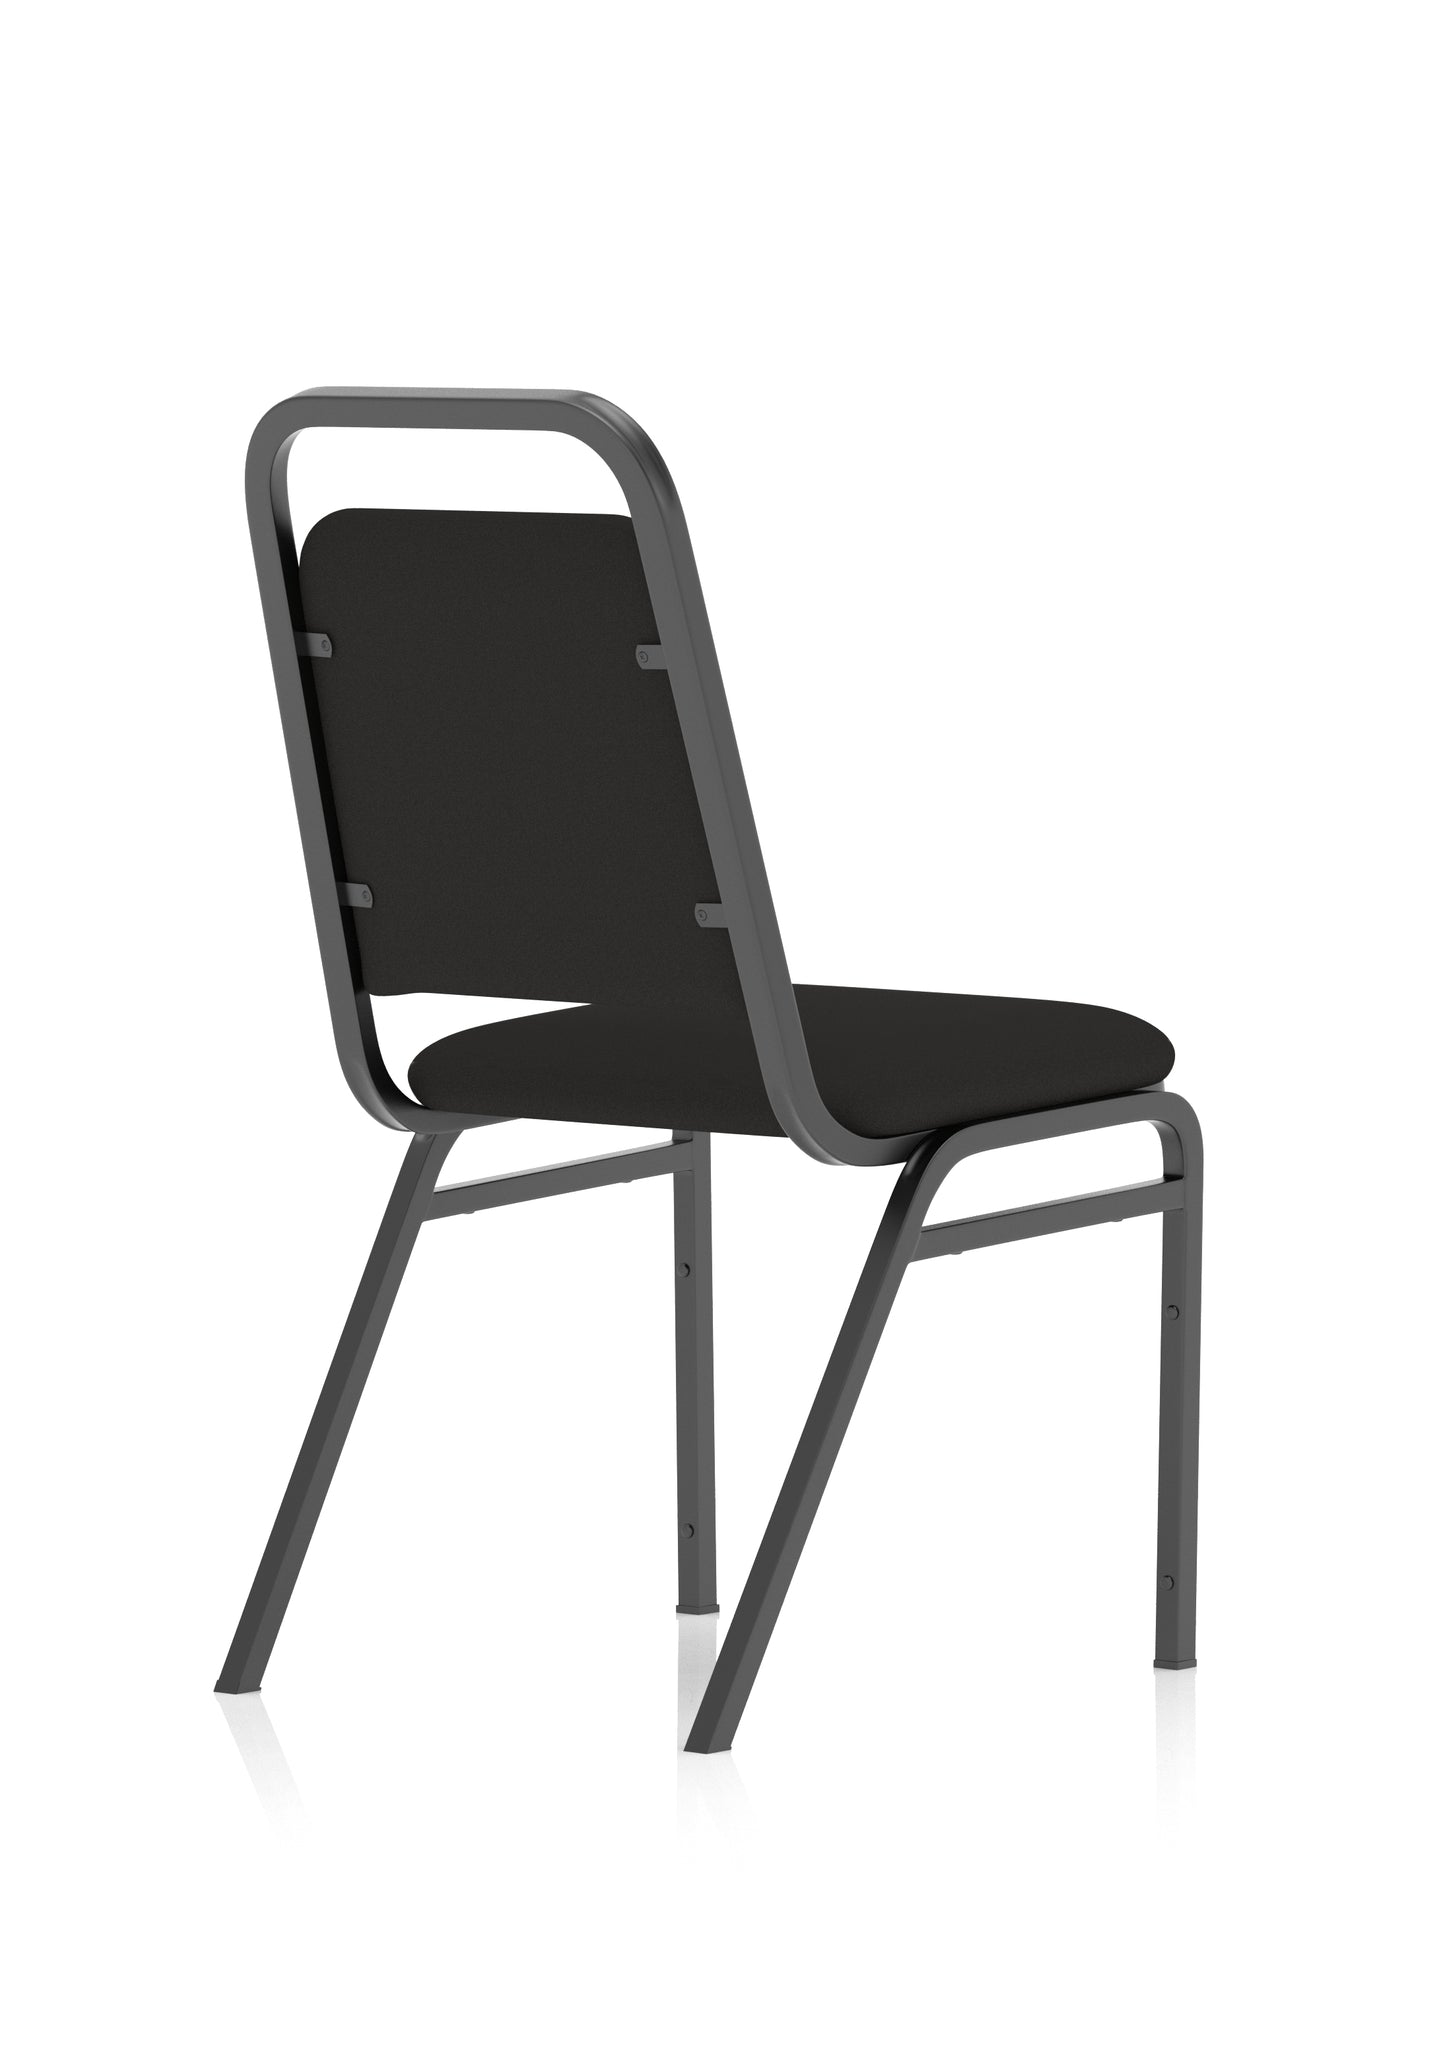 Banqueting Stacking Chair - Fabric Seat & Back, Steel Frame, Pre-Assembled, 115kg Capacity, 8hr Usage, 1-Year Guarantee - 460x500x850mm